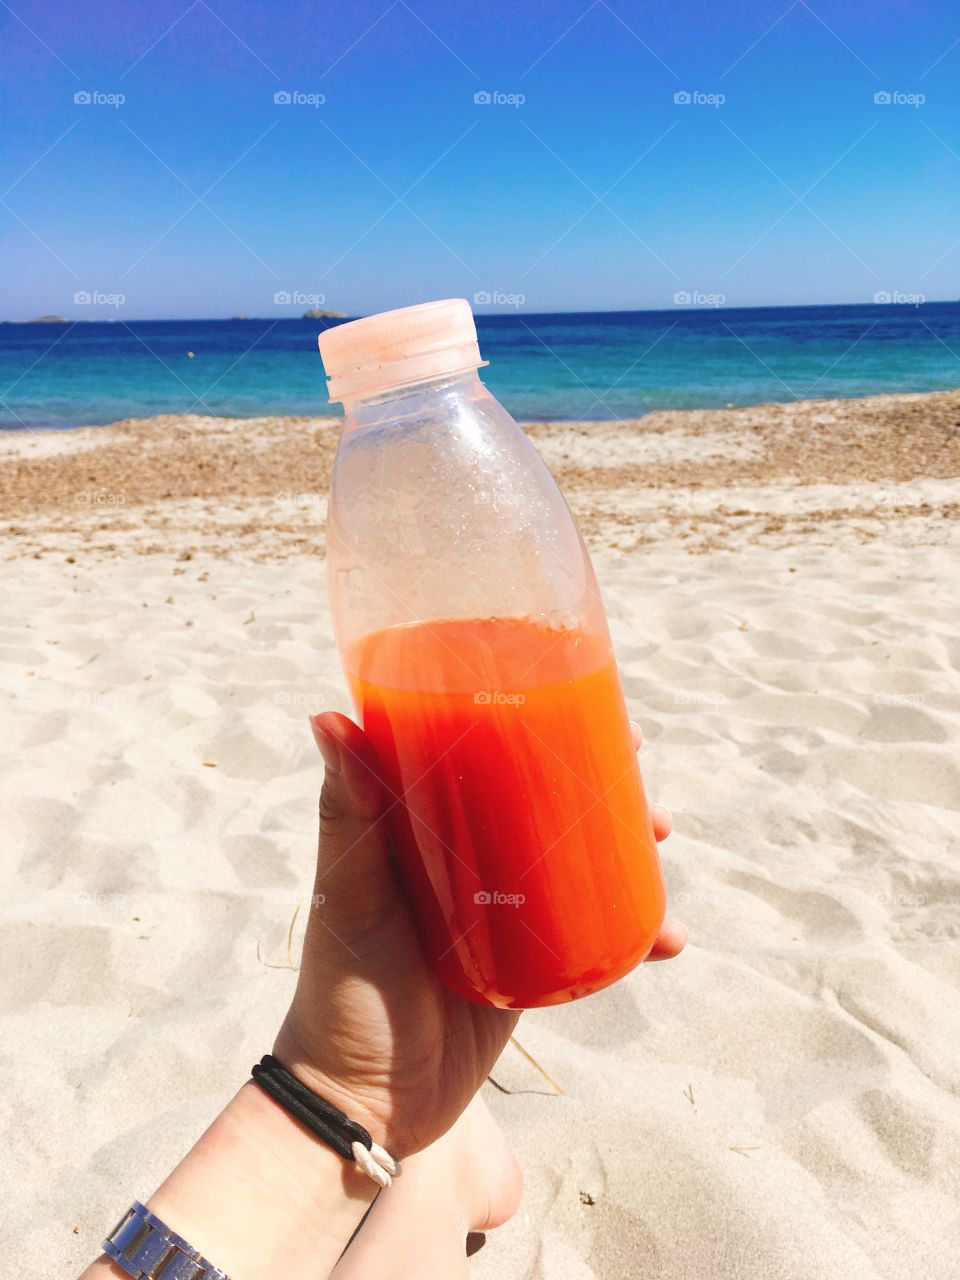 Strawberry juice in the summer 